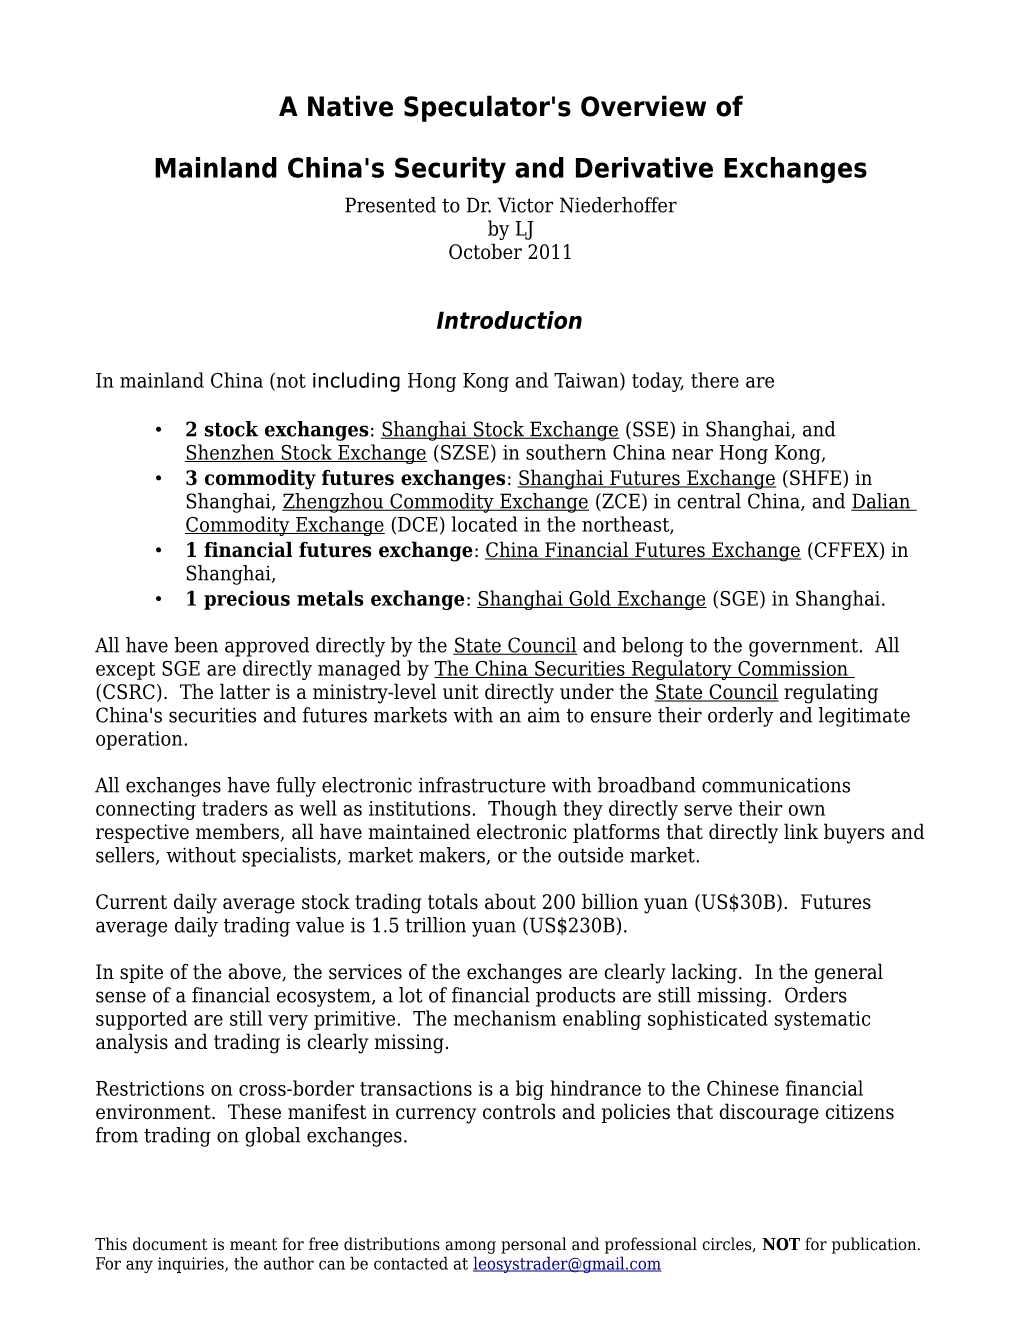 A Native Speculator's Overview of Mainland China's Security And